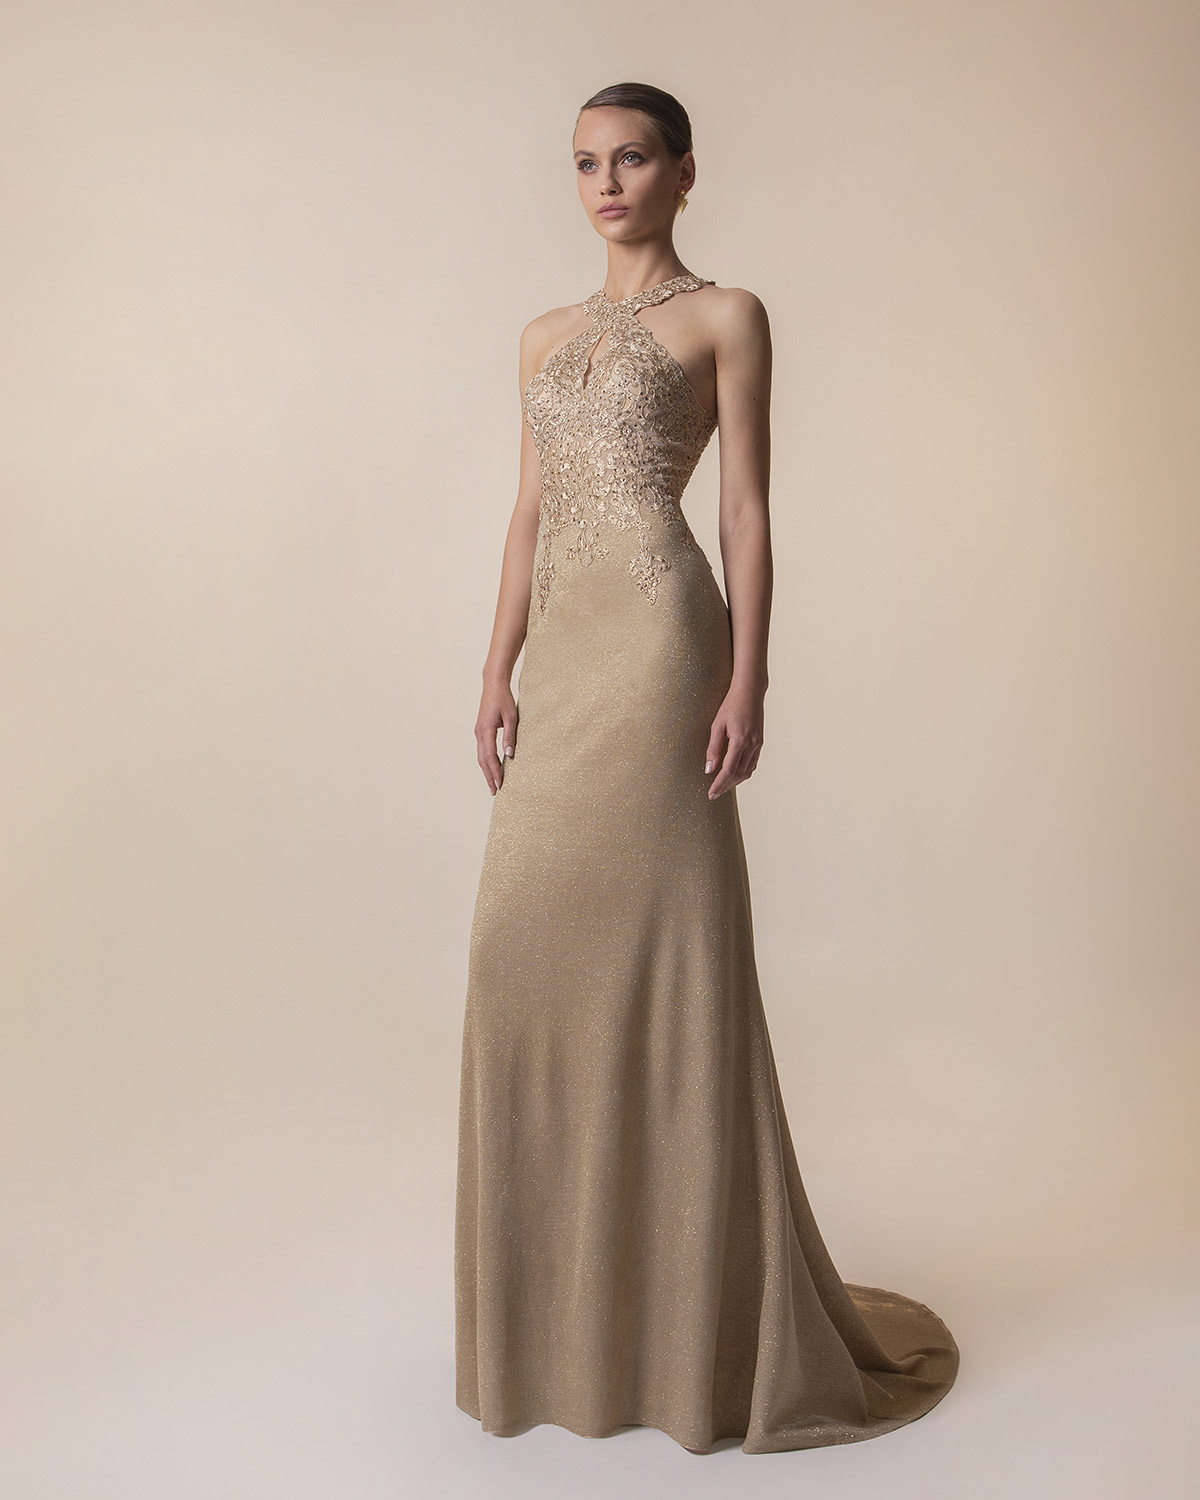 Mikael - YESENIA - Long evening dress with shining fabric and 